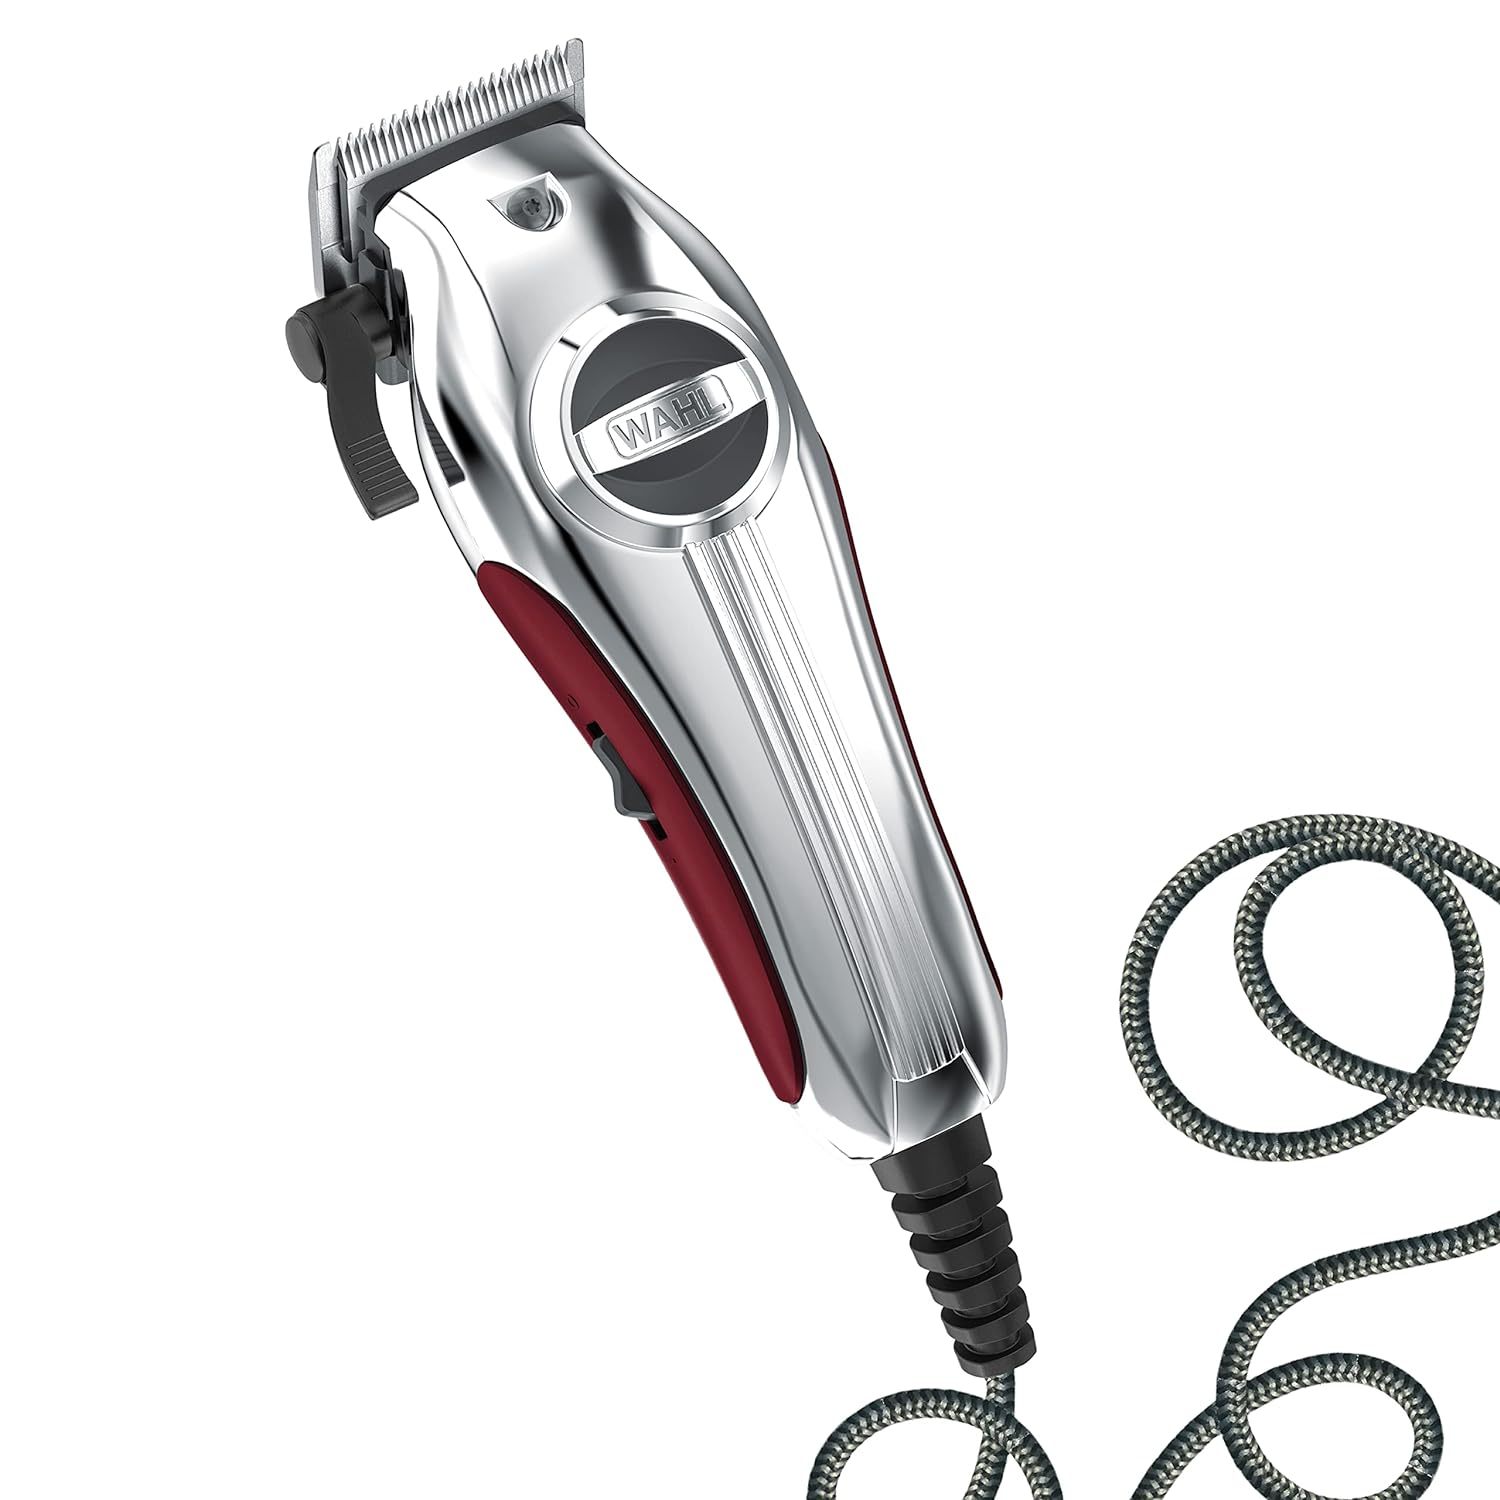 Model 3000097, By Wahl Usa, Is A Metal Hair Cutting Clipper, Quiet Operation. - $129.92